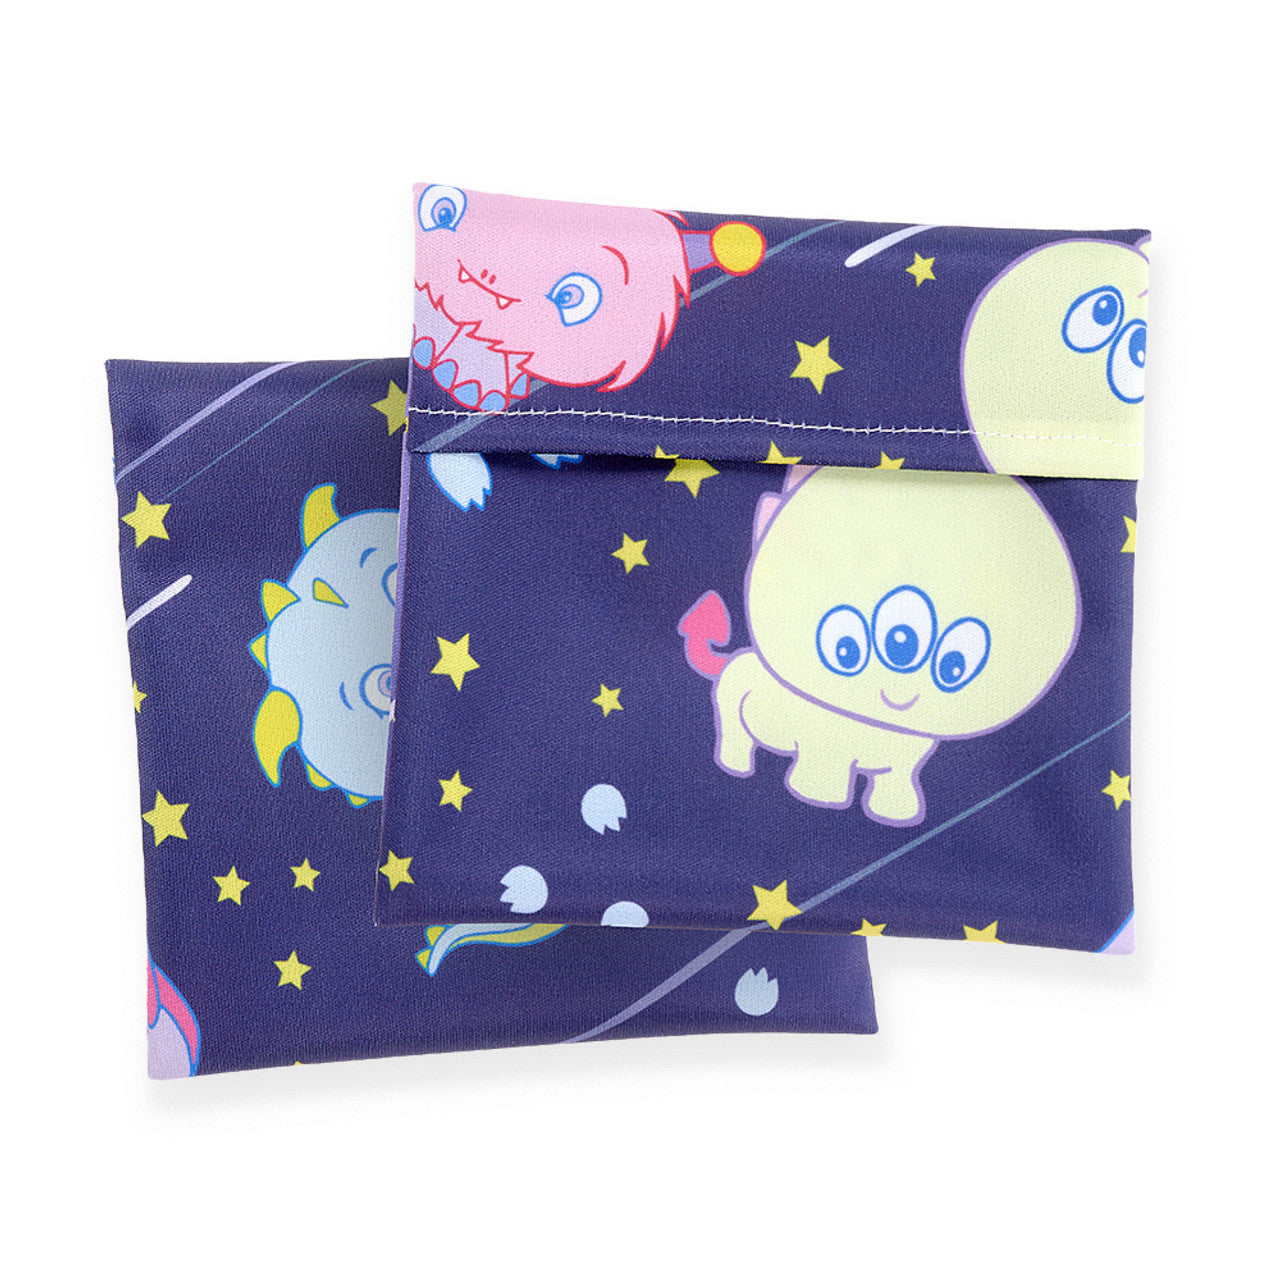 Rearz - Pacifier Storage Pouch - Lil' Monsters